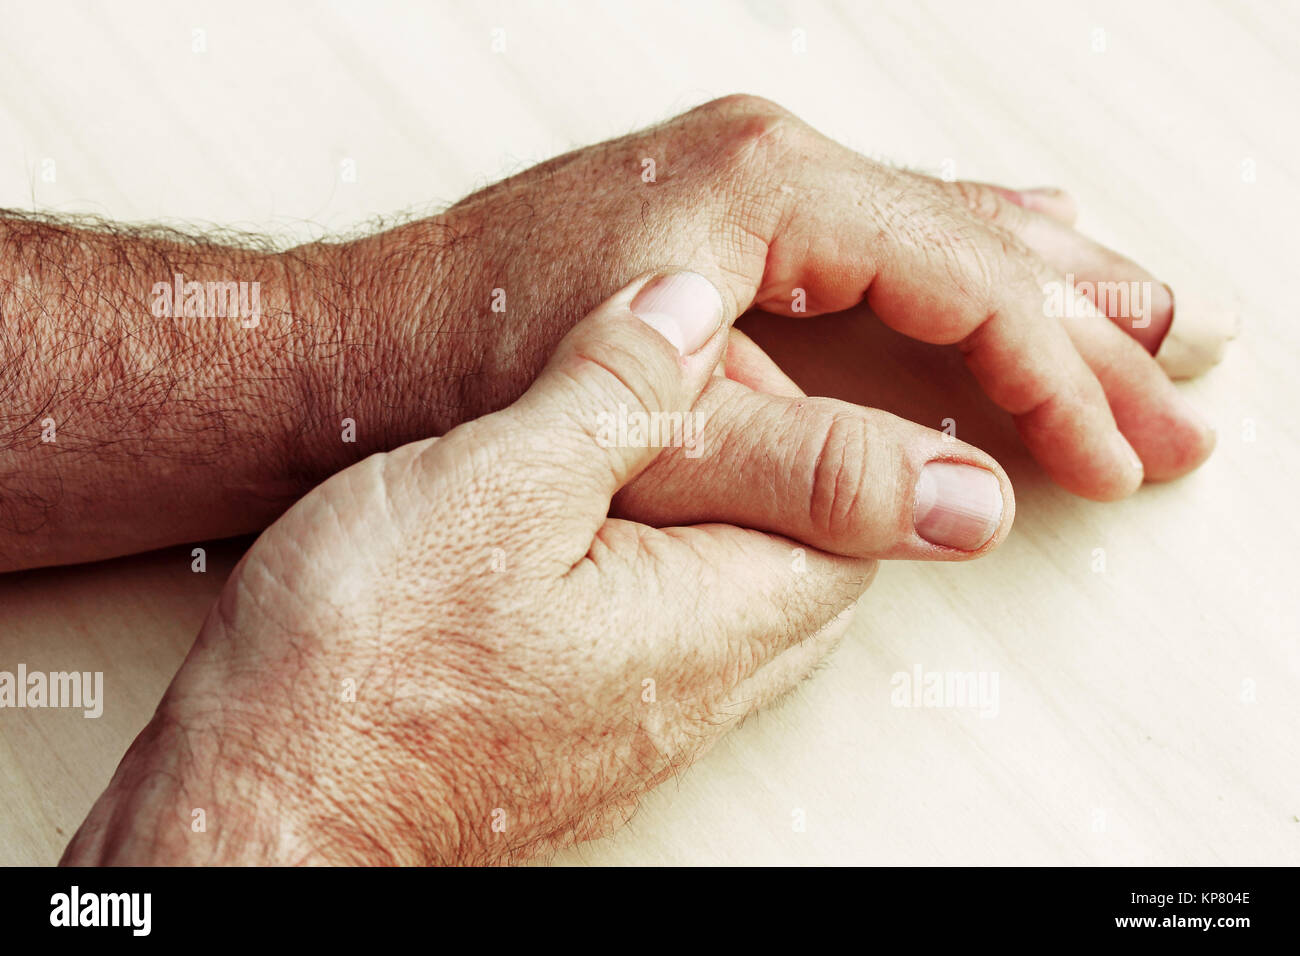 an elderly man has pain in fingers and hands Stock Photo